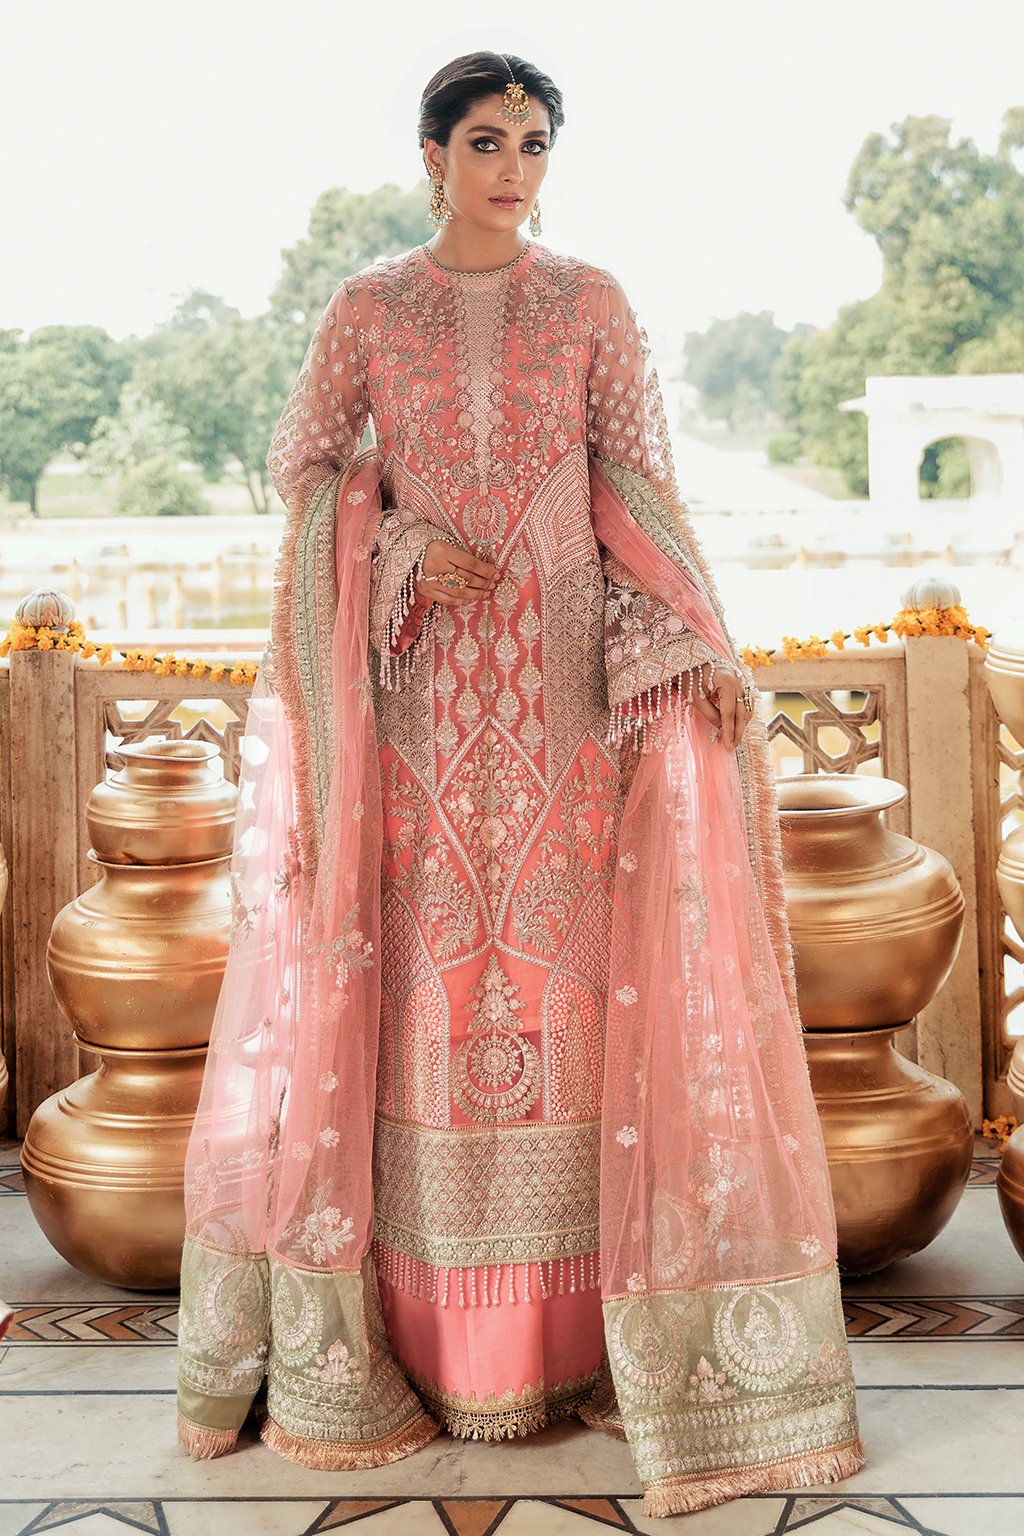 GISELE | SHAGUN WEDDING COLLECTION '21 | NOOR JEHAN Pink dresses exclusively available @lebaasonline. Gisele Pakistani Designer Dresses in UK Online, Maria B is available with us. Buy Gisele Clothing Pakistan for Pakistani Bridal Outfit look. The dresses can be customized in UK, USA, France at Lebaasonline